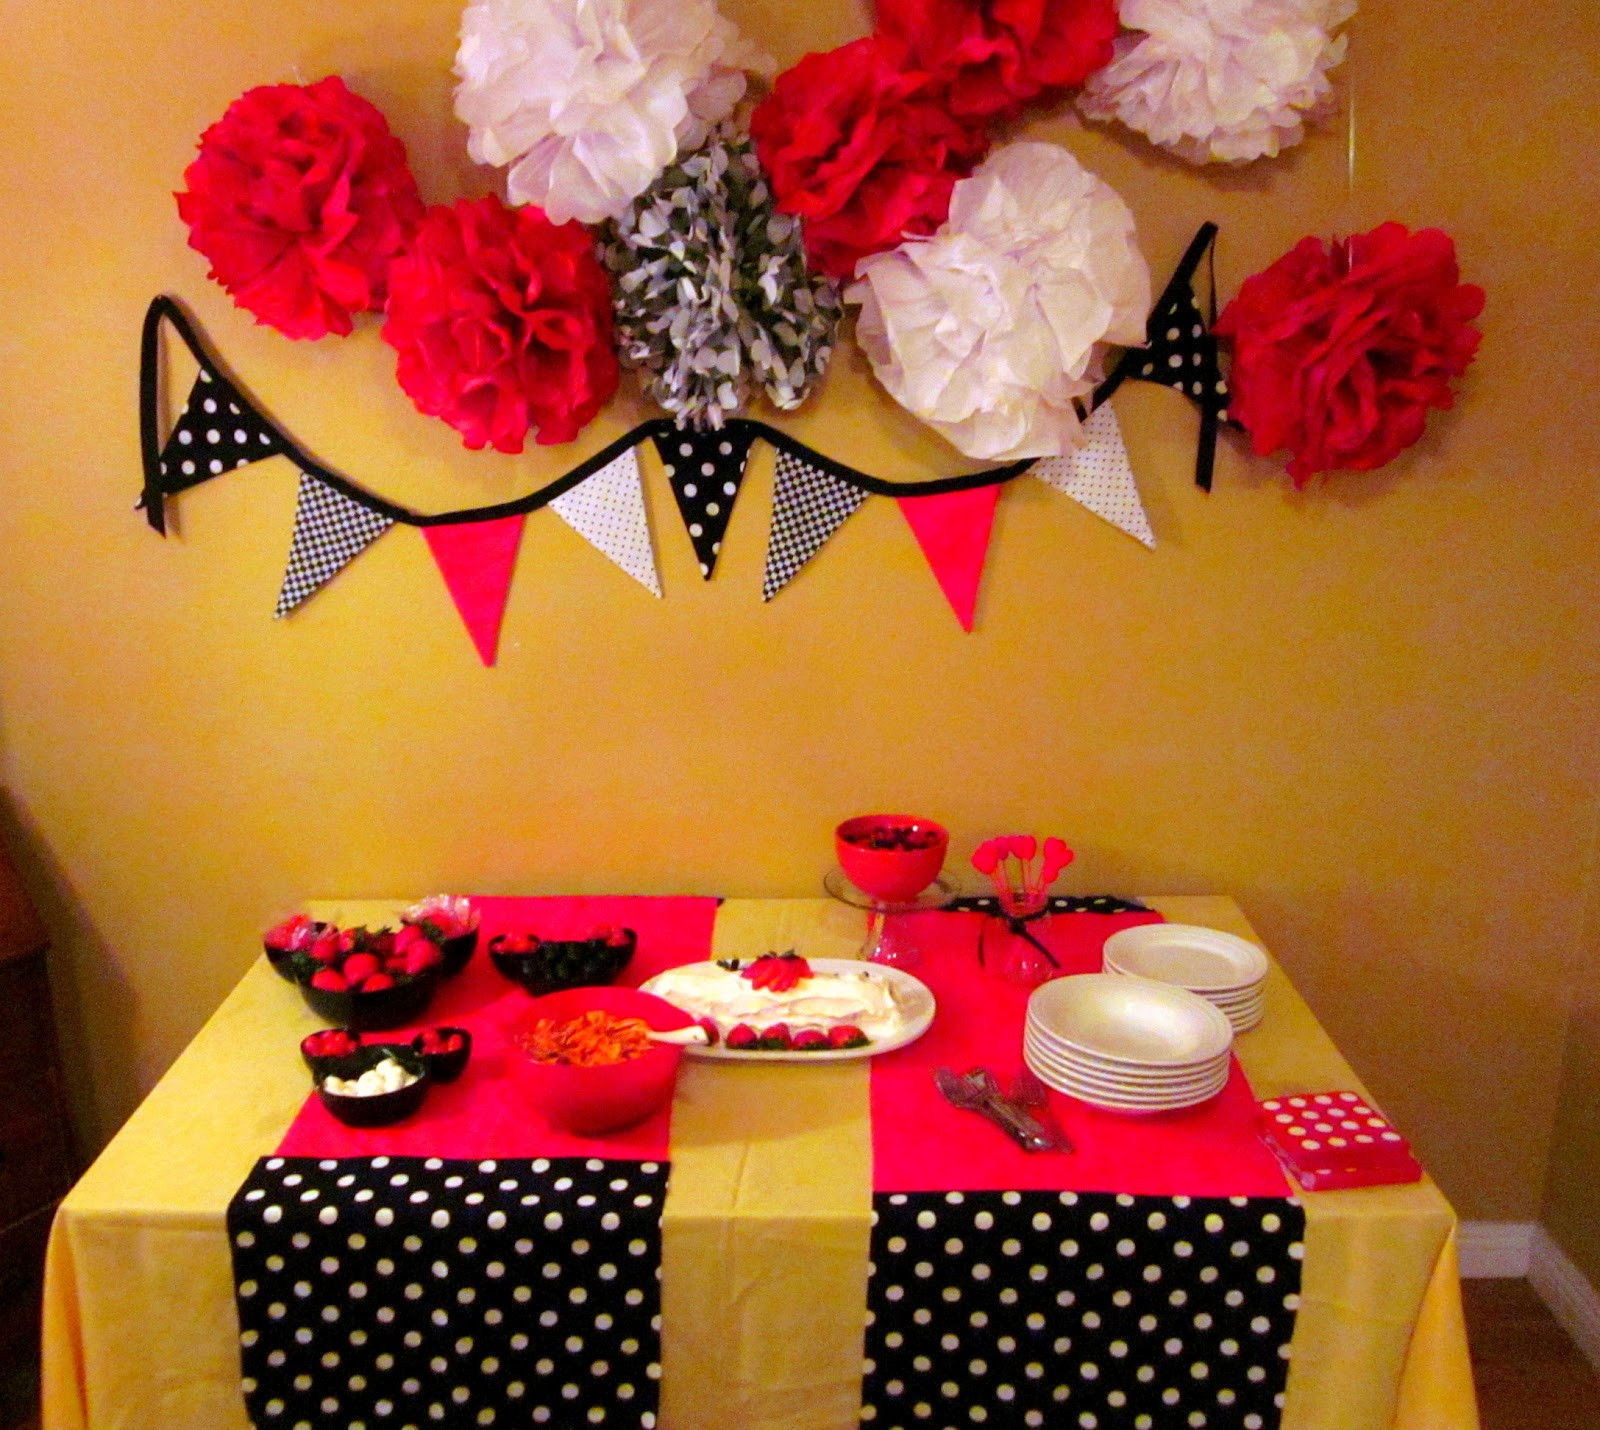 Minnie Mouse Birthday Decorations Red
 We Grow By Our Dreams Minnie Mouse Party For Grown Ups